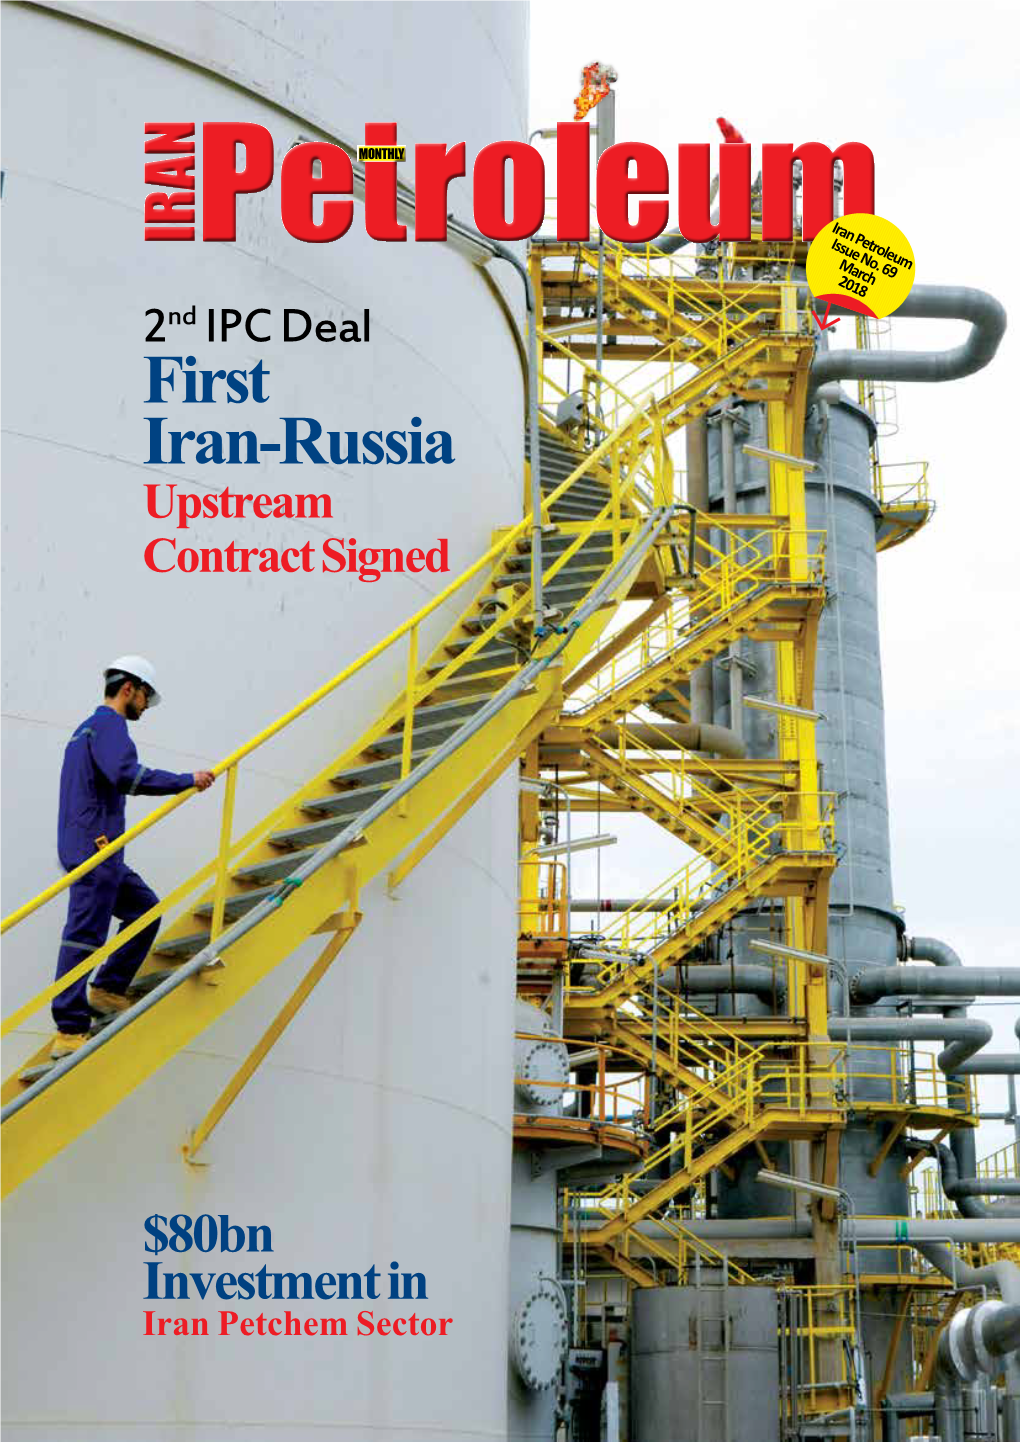 First Iran-Russia Upstream Contract Signed